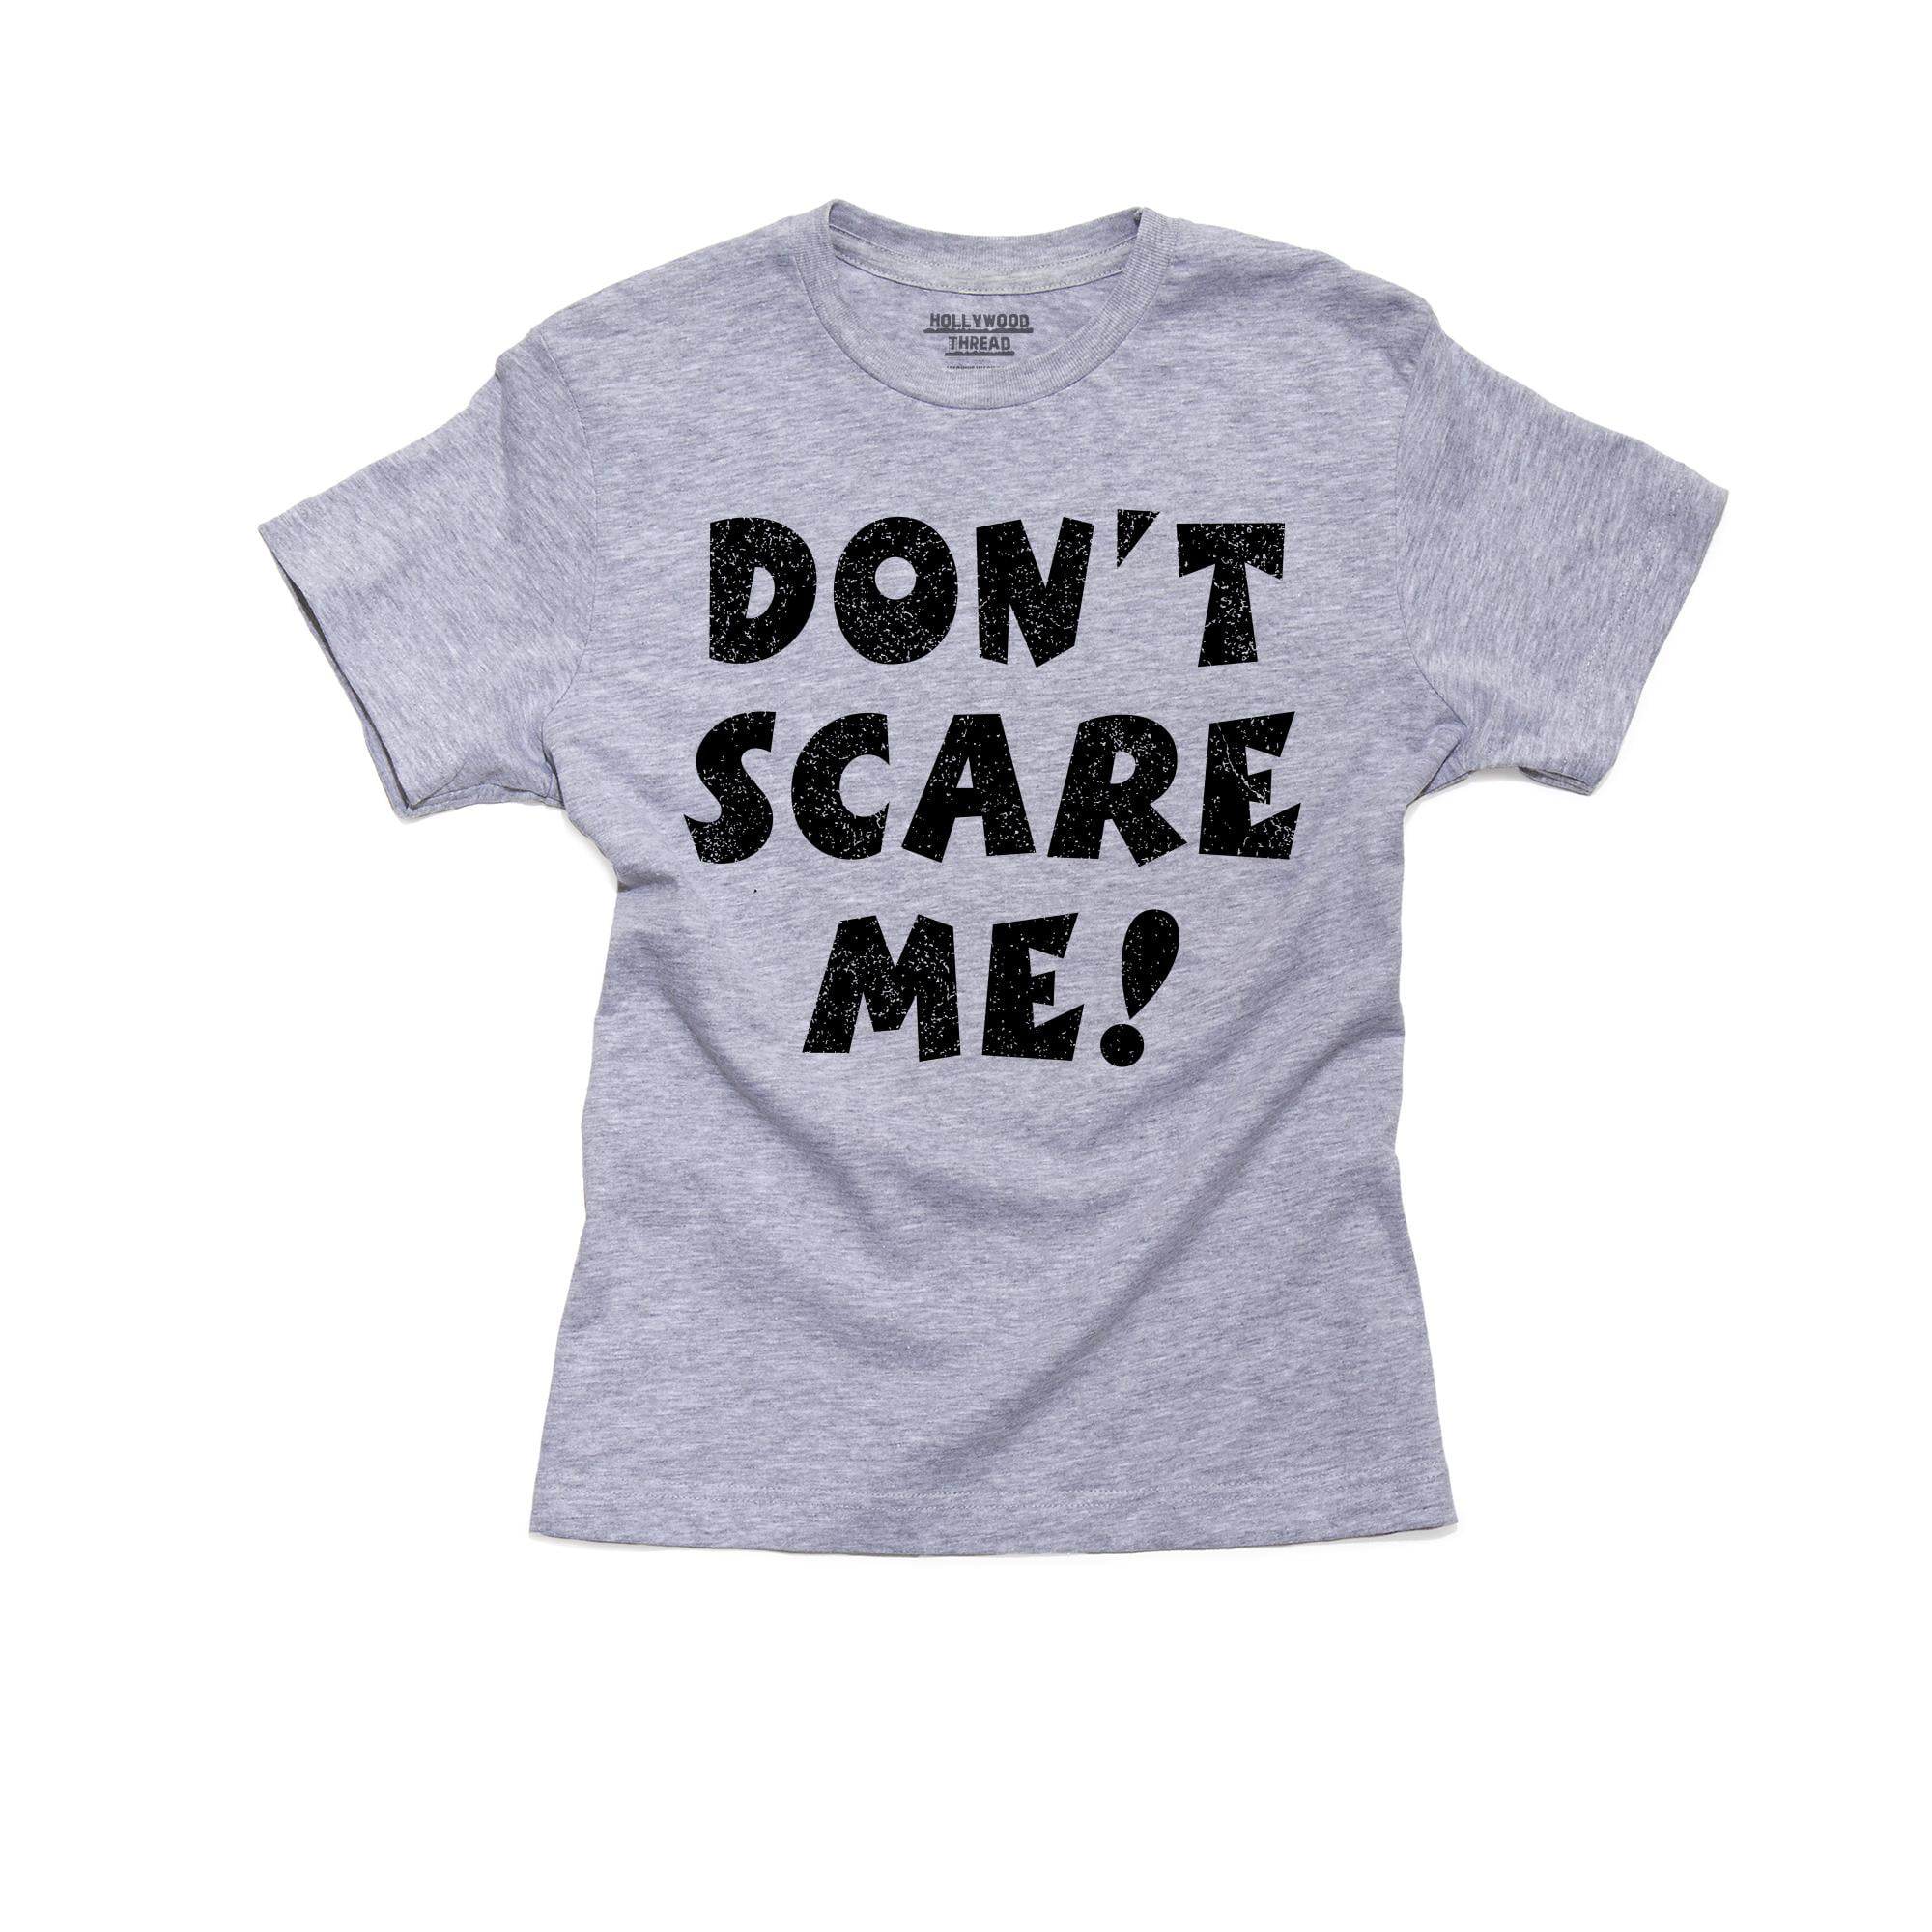 Don't Scare Me I Poop Very Easily Childrens Kids Boys Girls Funny Tee T-Shirt 